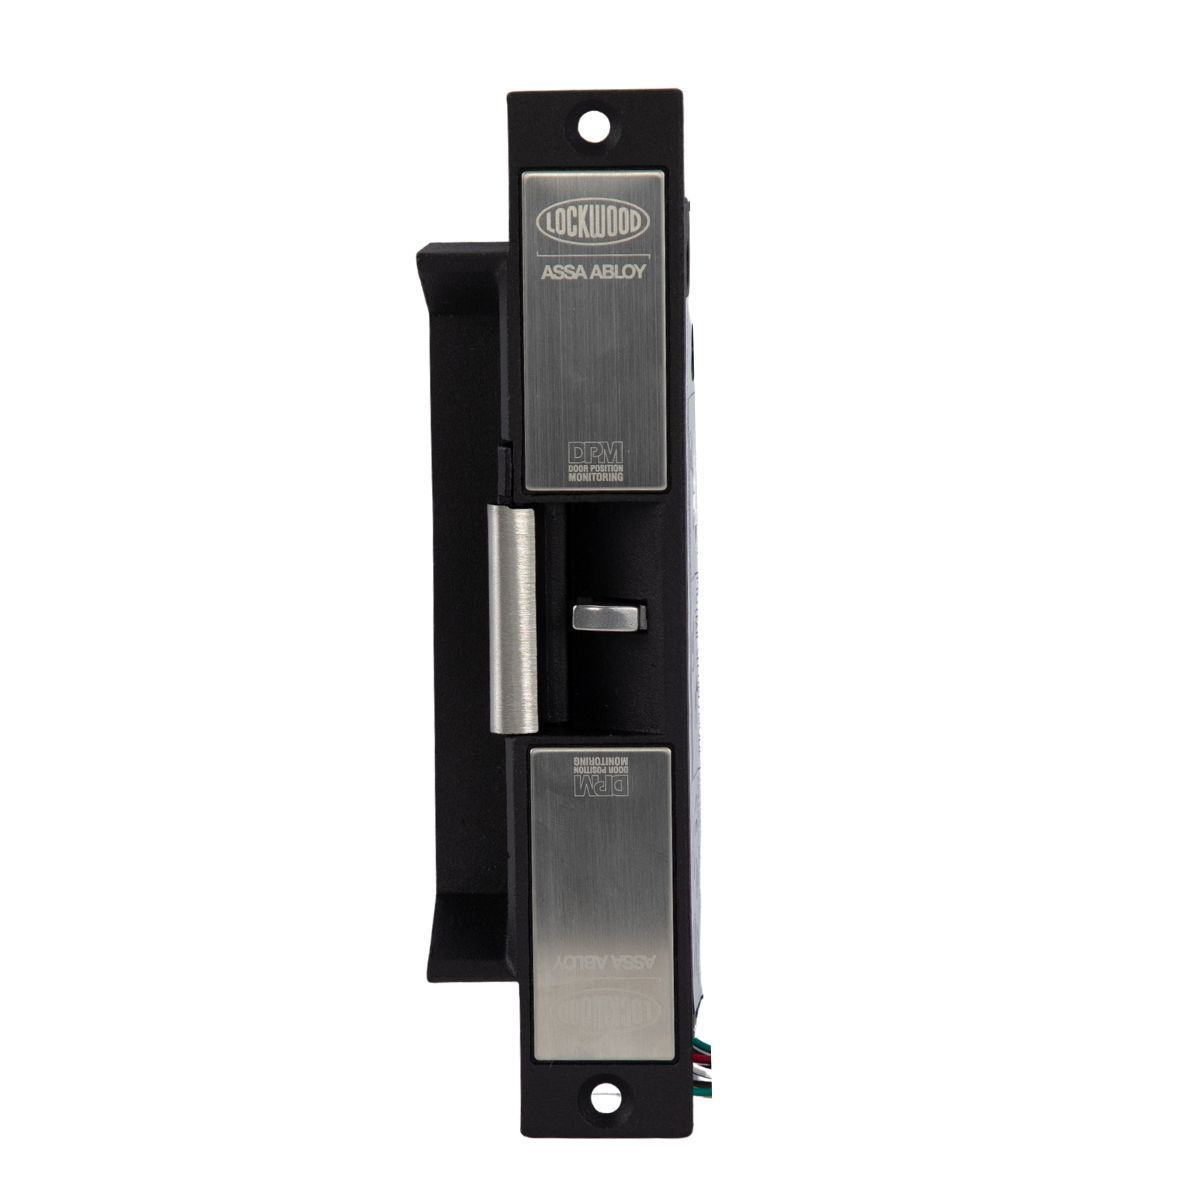 ASSA ABLOY LOCKWOOD PADDE SERIES HIGH SECURITY ELECTRIC STRIKE MONITORED FAIL SAFE/FAIL SECURE(FIELD CHANGEABLE) 12-30VDC